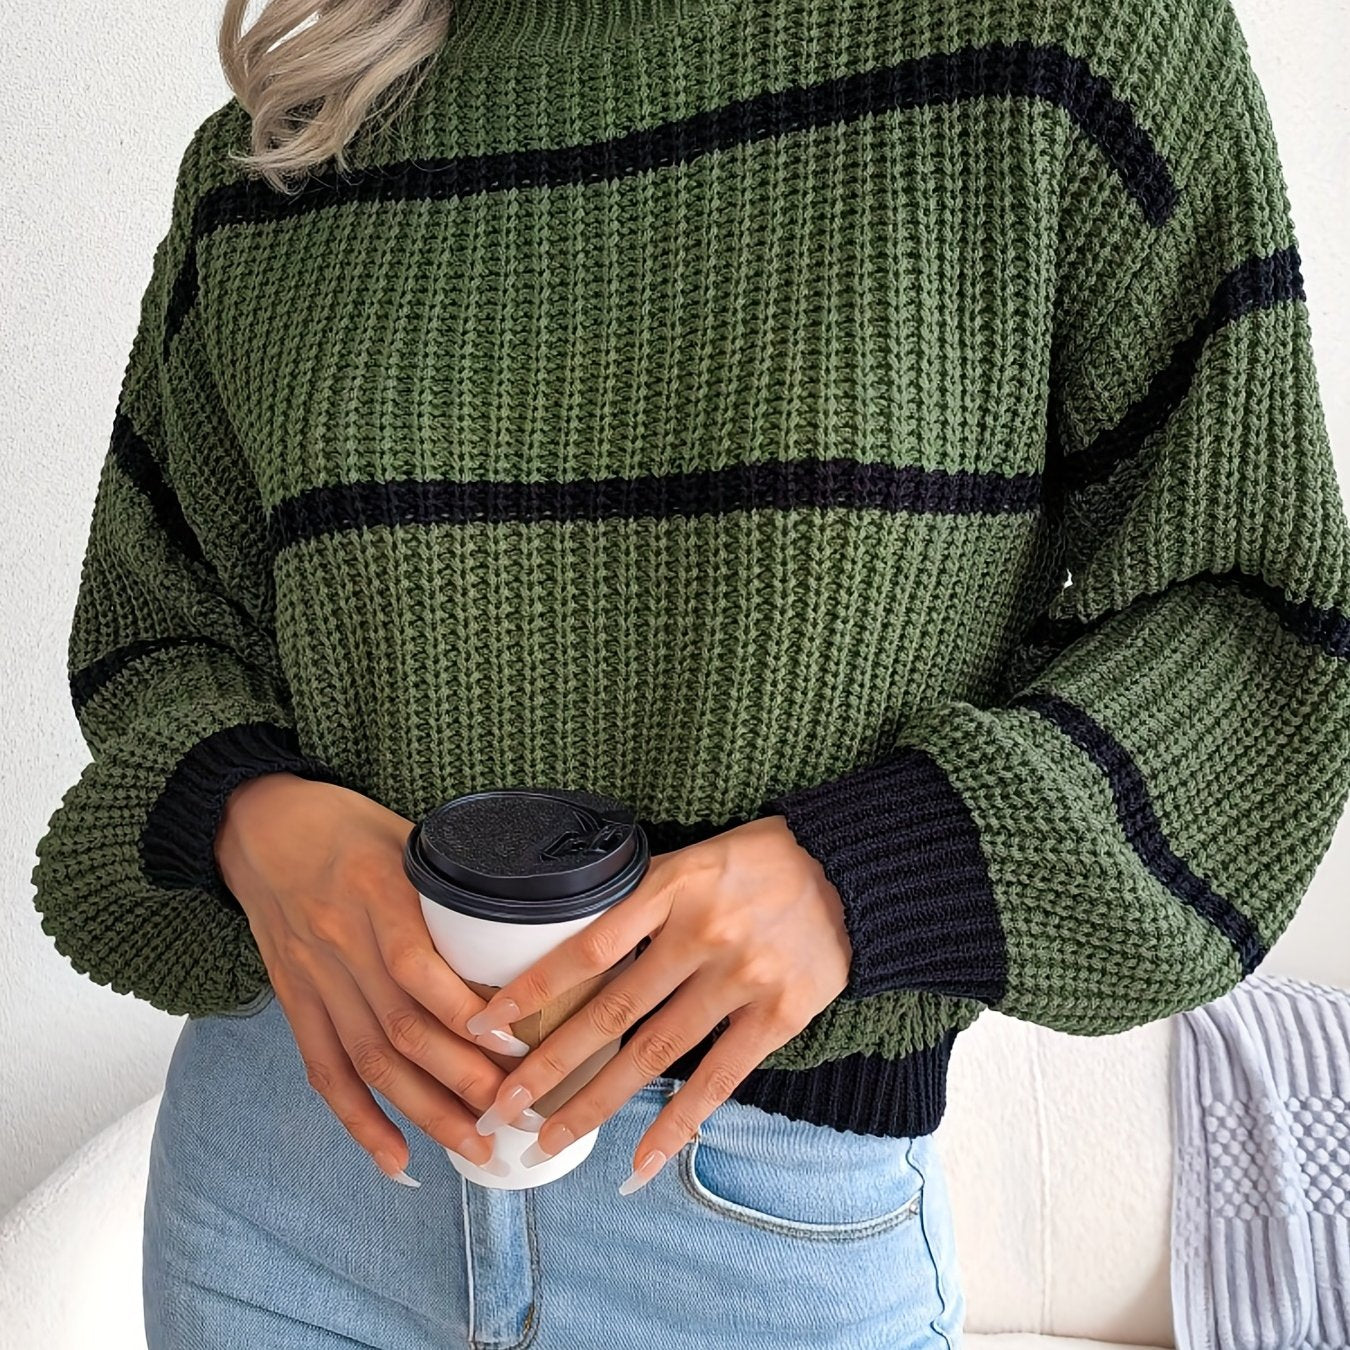 Antmvs Striped Color Block Crew Neck Sweater, Casual Long Sleeve Loose Fall Winter Knit Sweater, Women's Clothing